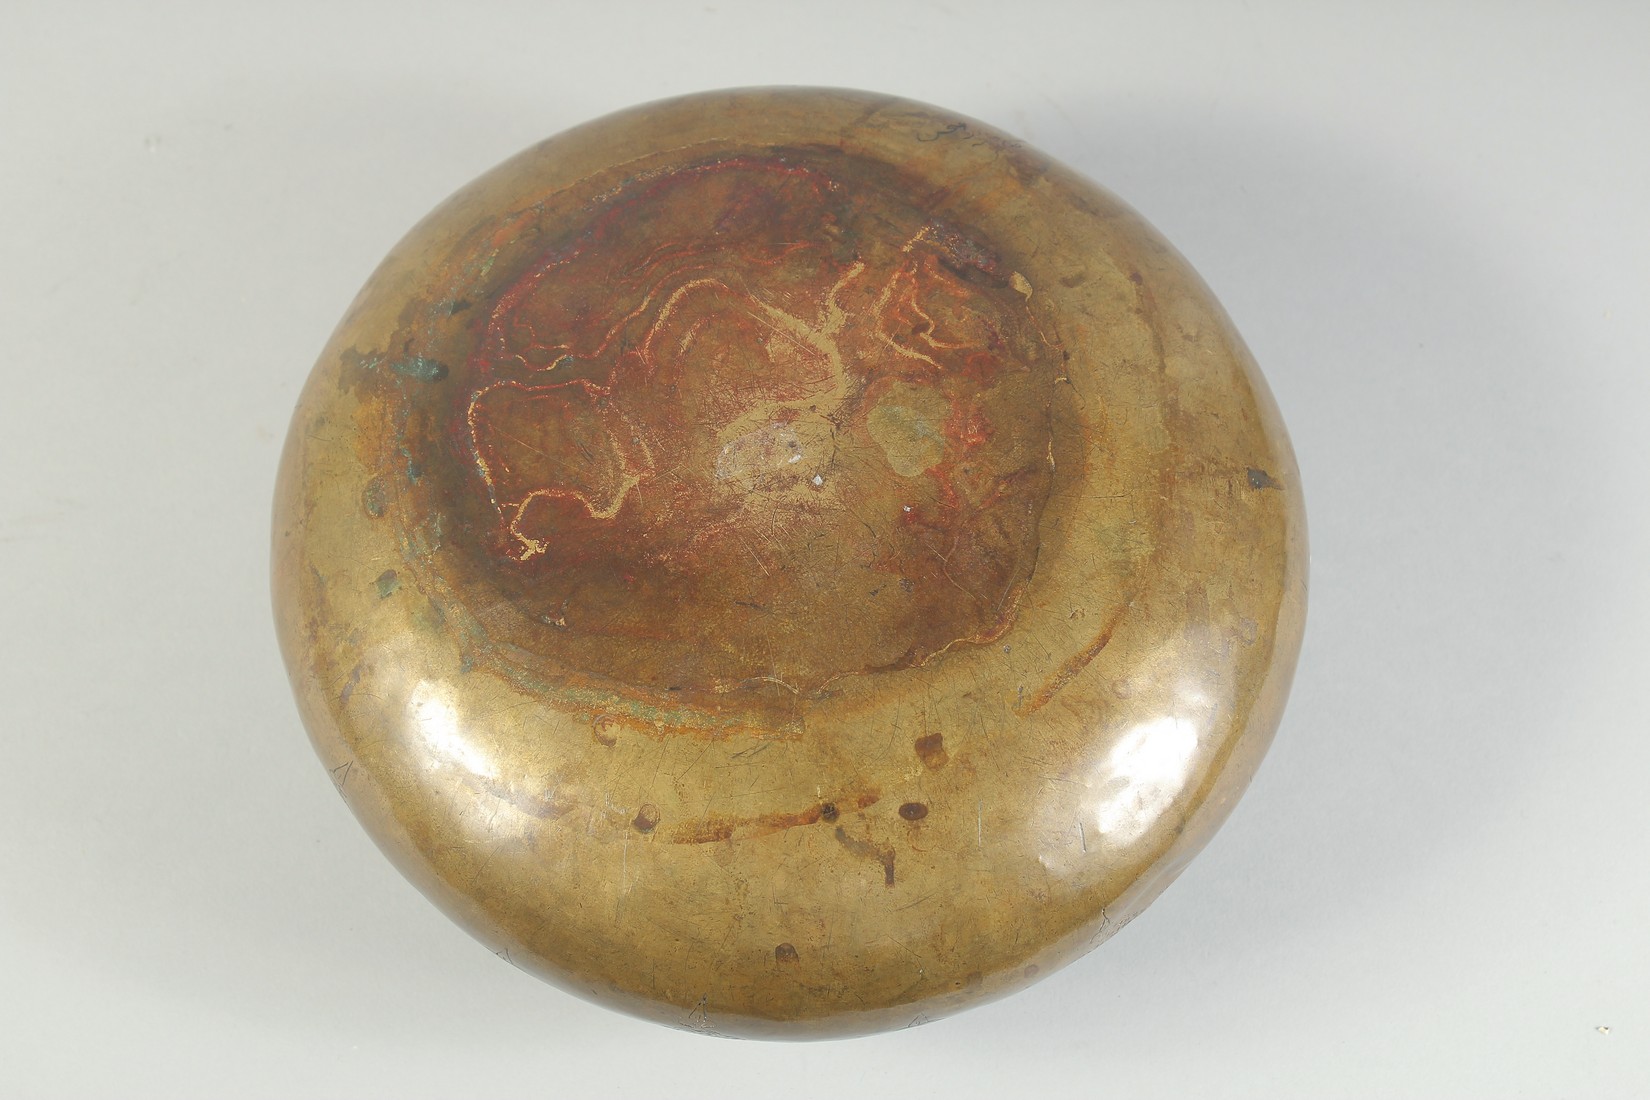 A VERY FINE 14TH CENTURY PERSIAN ILKHANID FARS SILVER INLAID BRASS BOWL, with a band of - Image 5 of 5